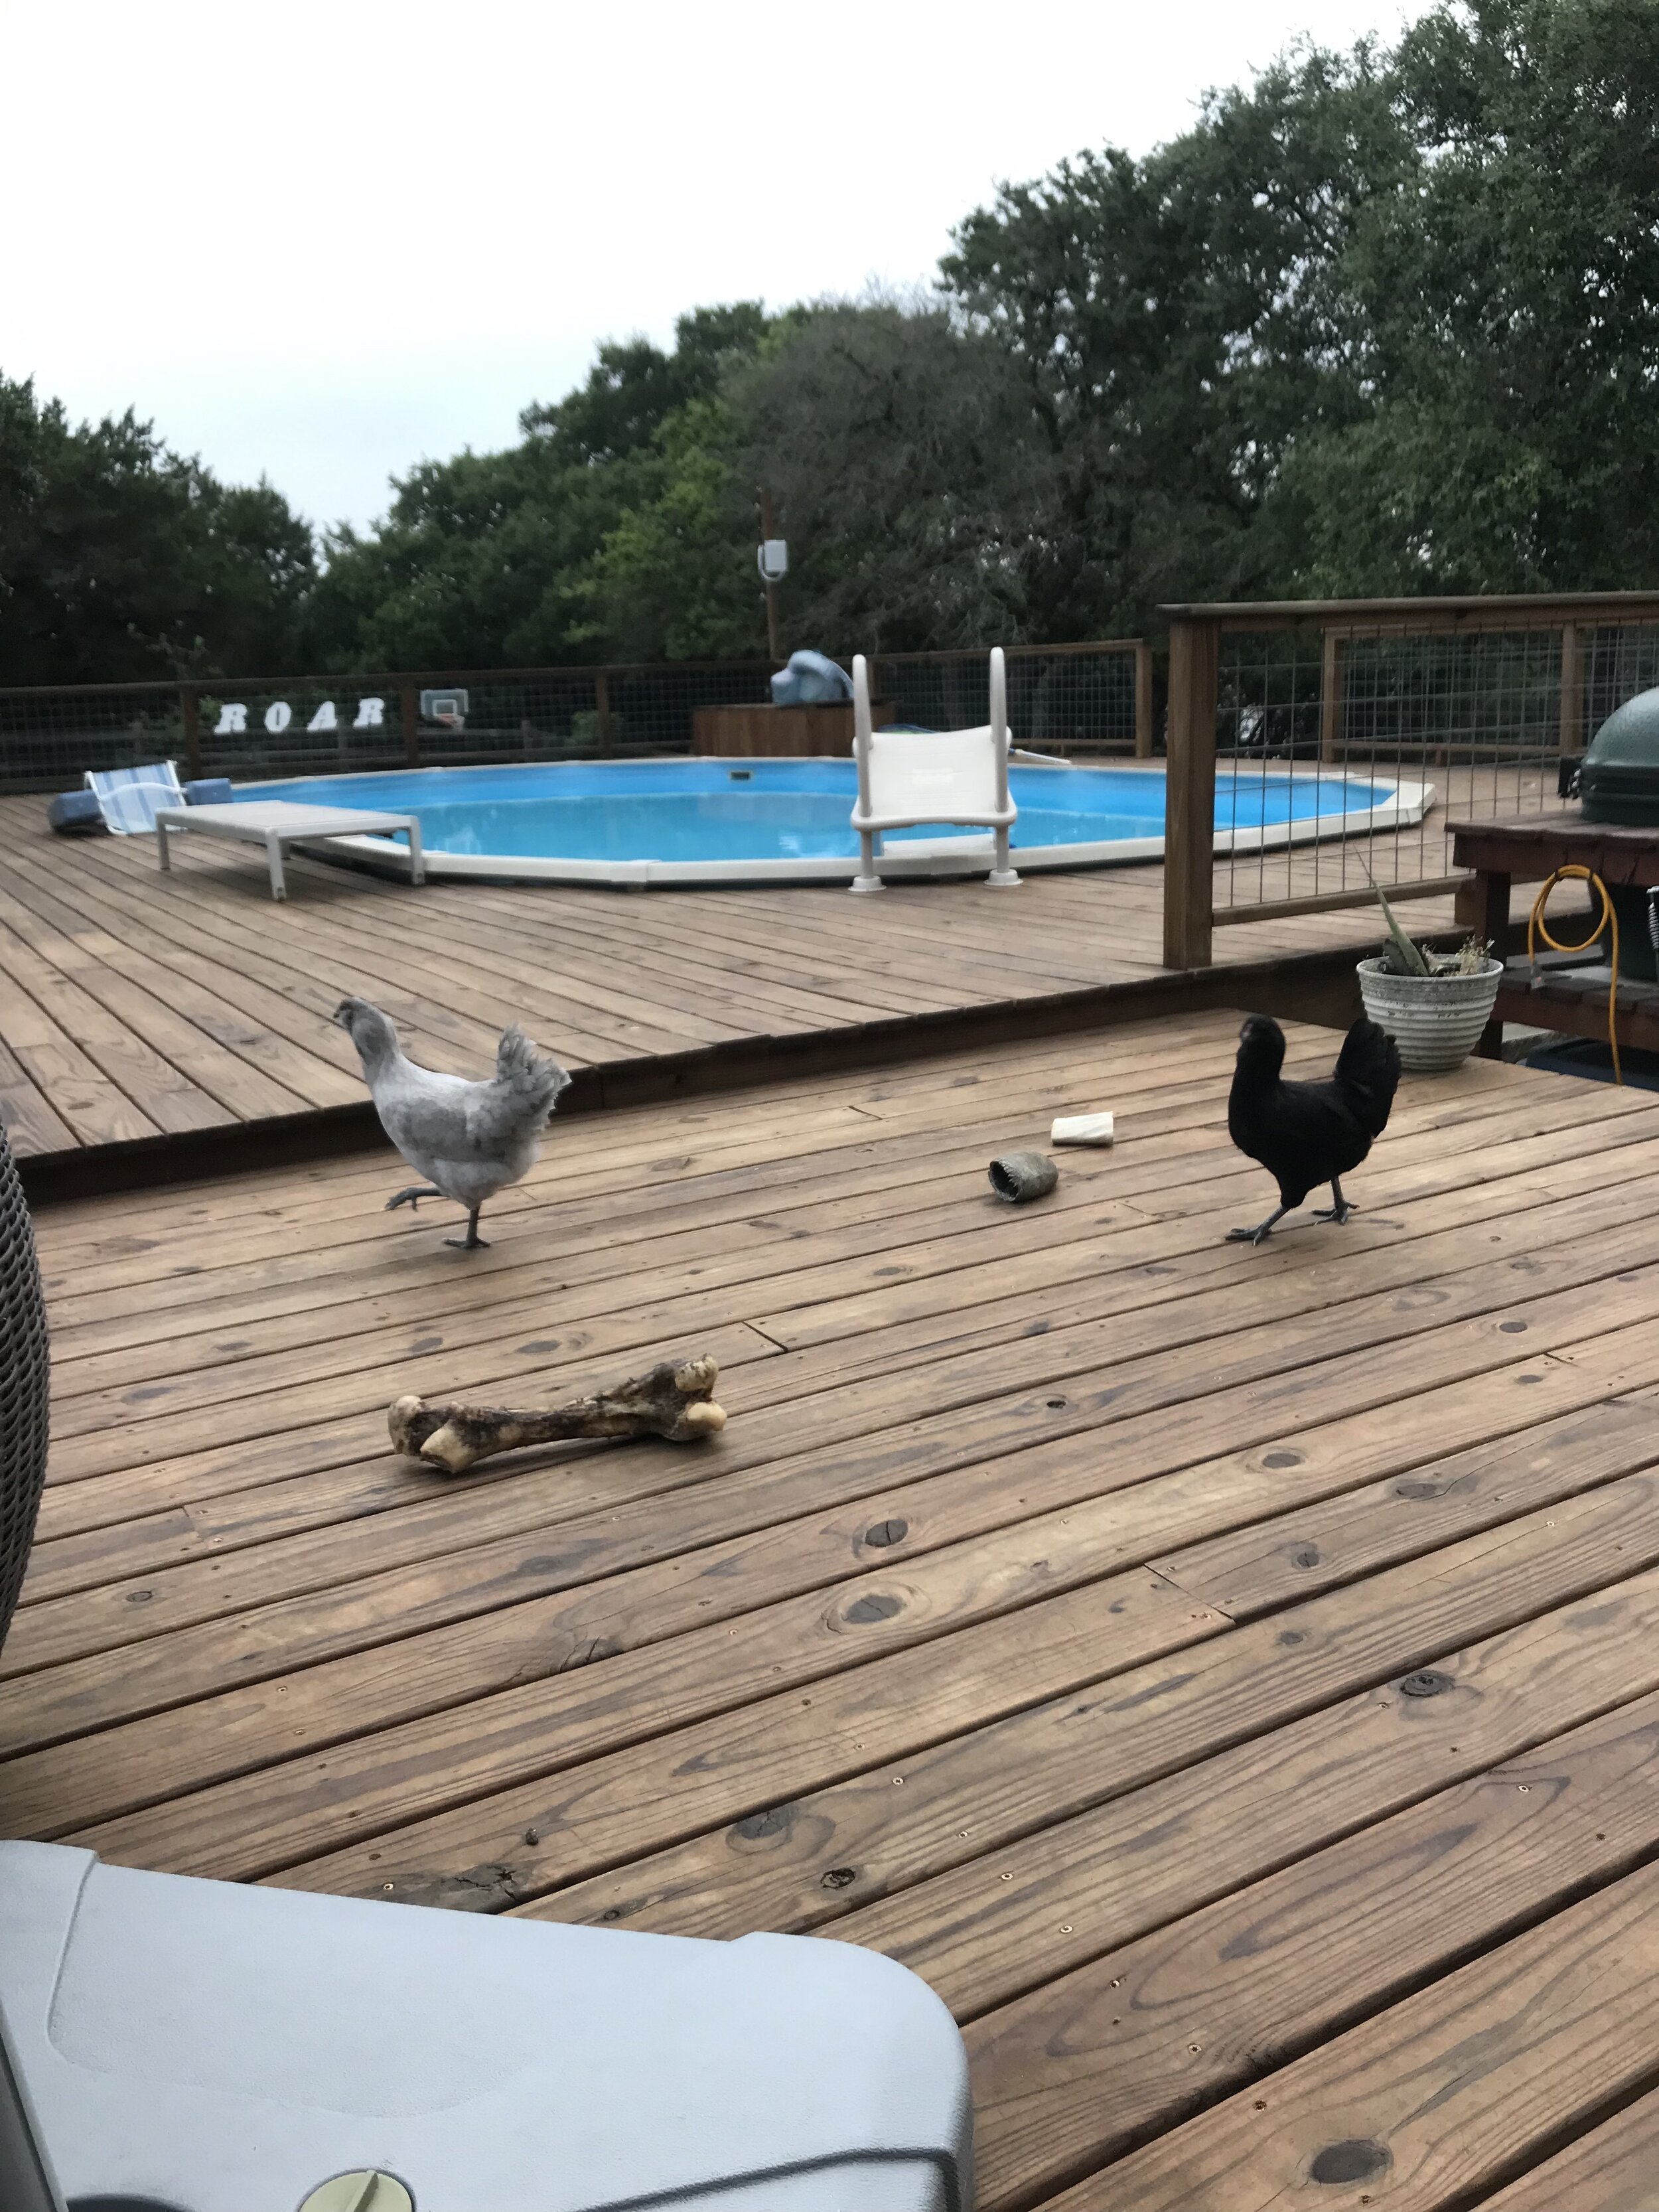 Pullets "chicken out" before crossing deck